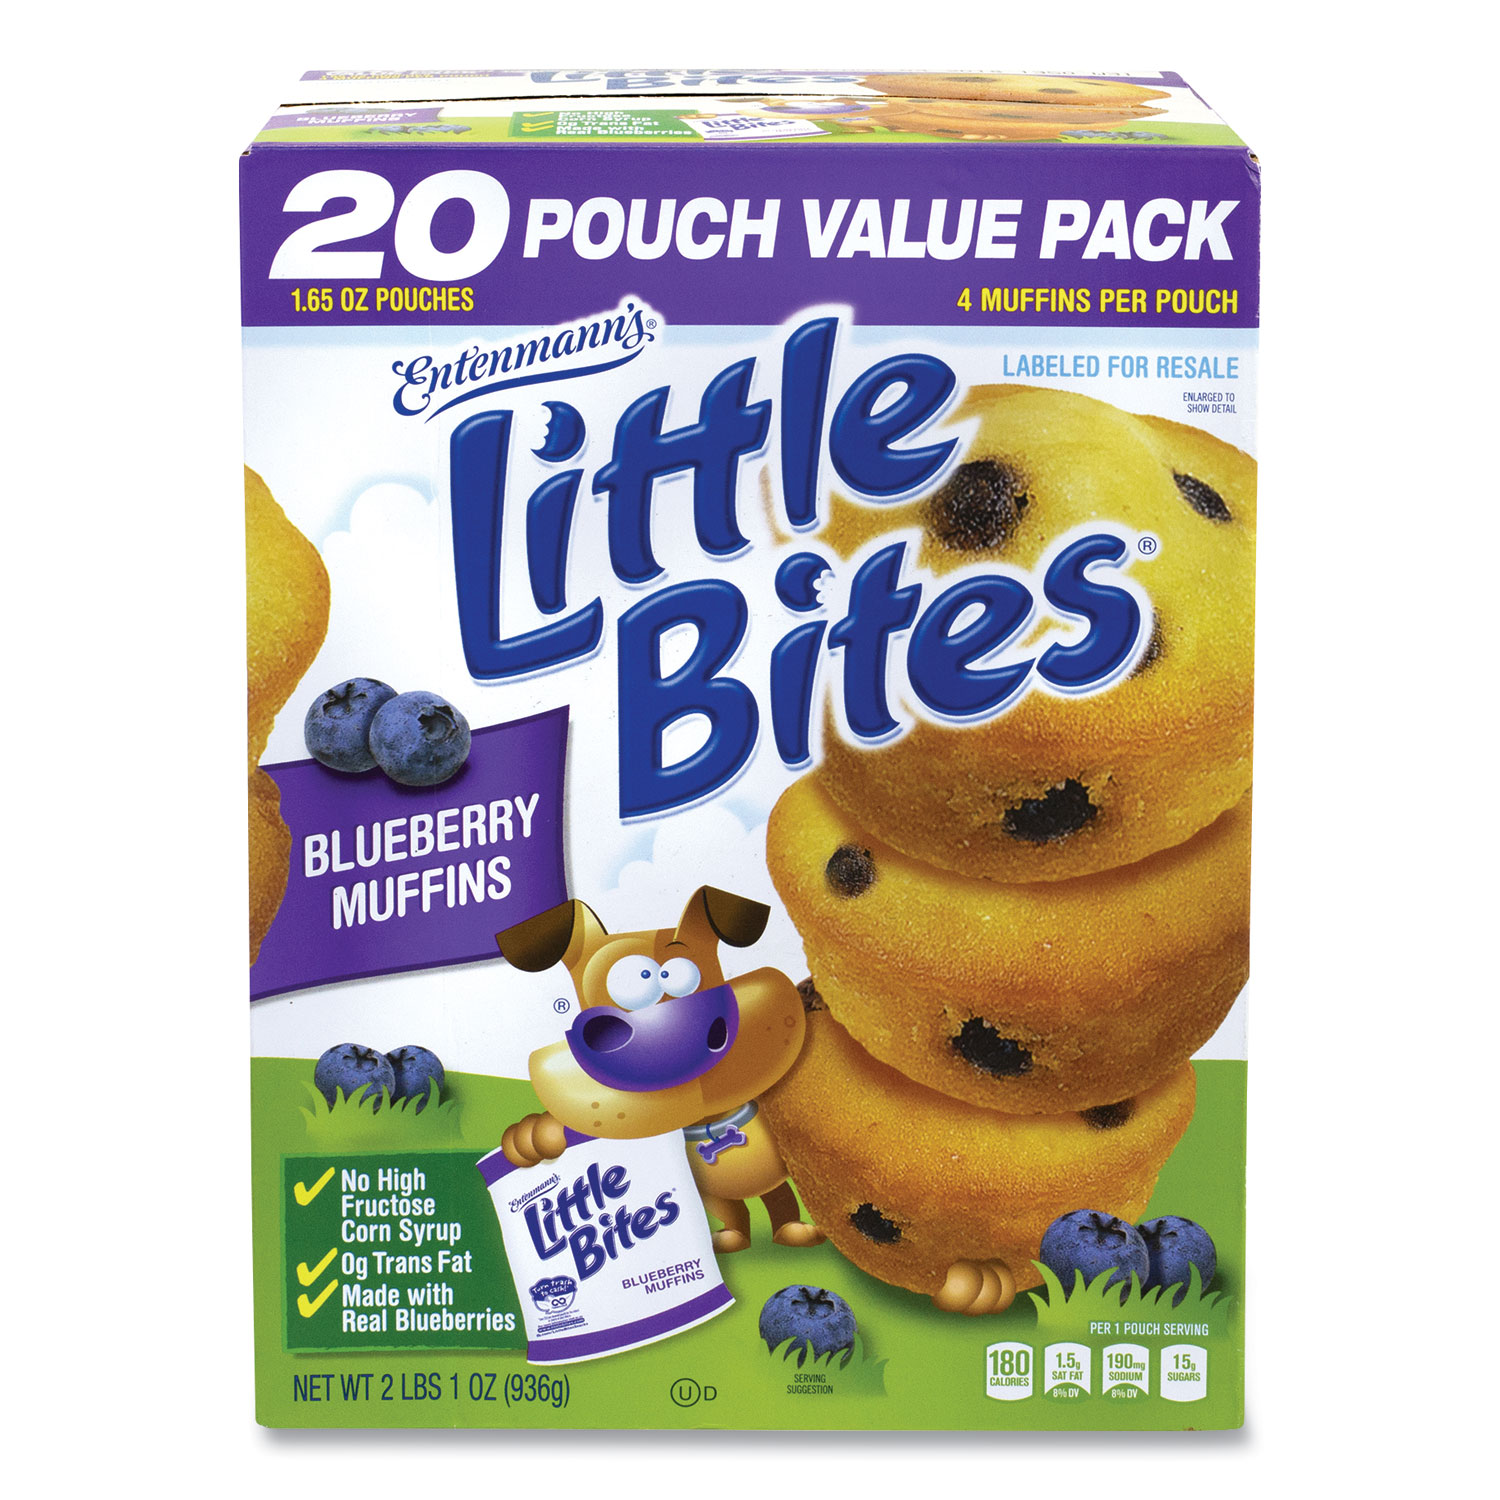  Entenmann's Little Bites 18485 Little Bites Muffins, Blueberry, 1.65 oz Pouch, 20 Pouches/Box, Free Delivery in 1-4 Business Days (GRR90000137) 